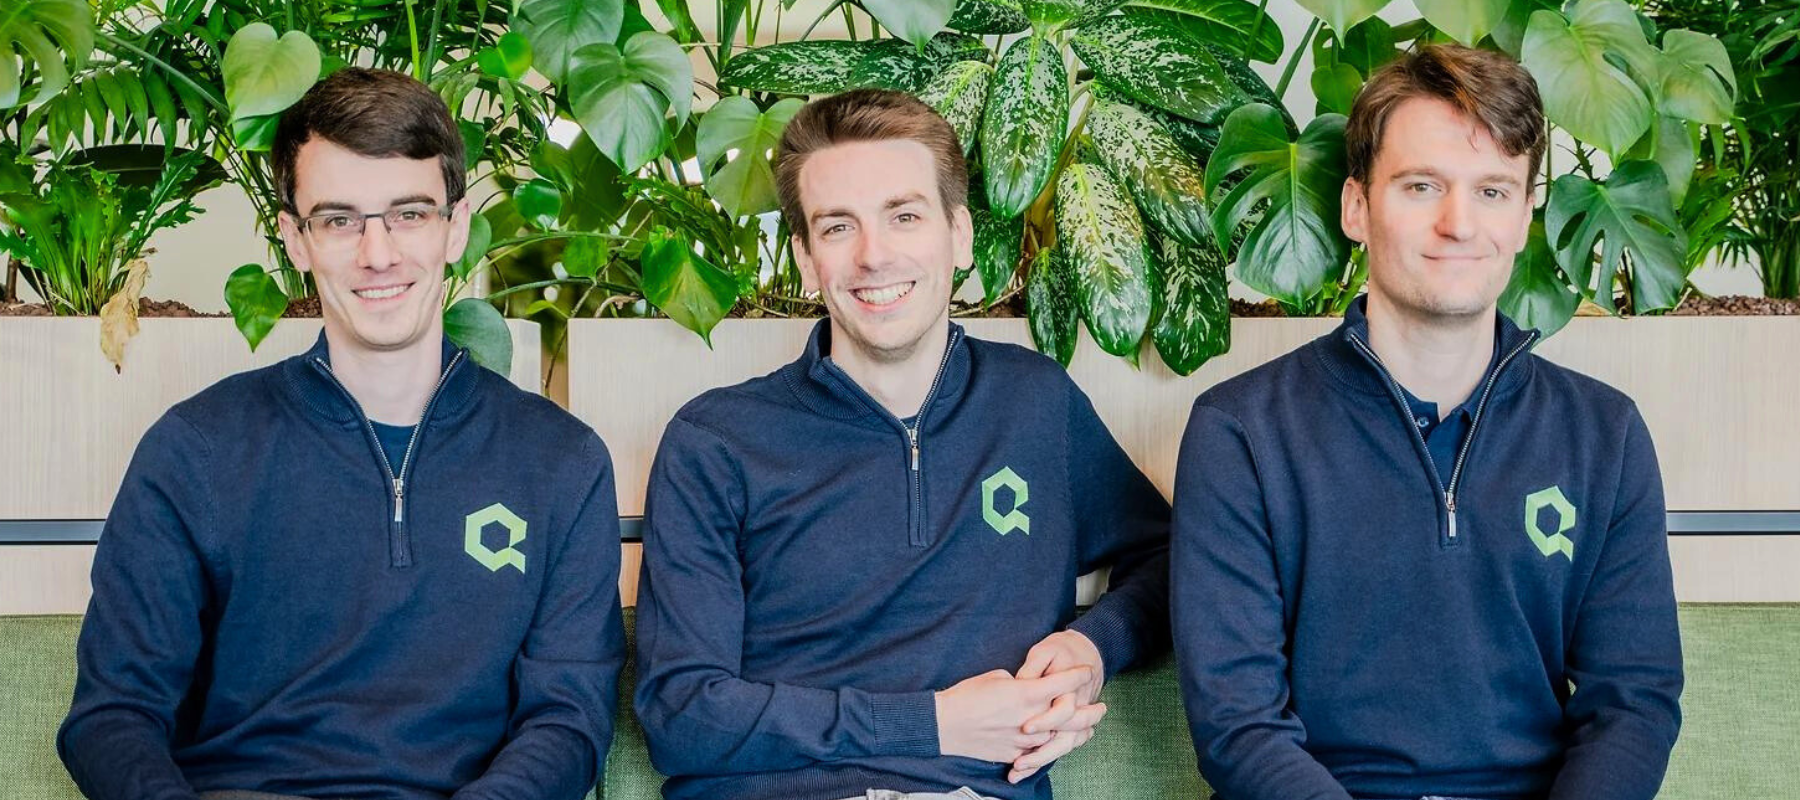 Ghent-based Qargo raises €12m to build an all-in-one platform to streamline the logistics industry